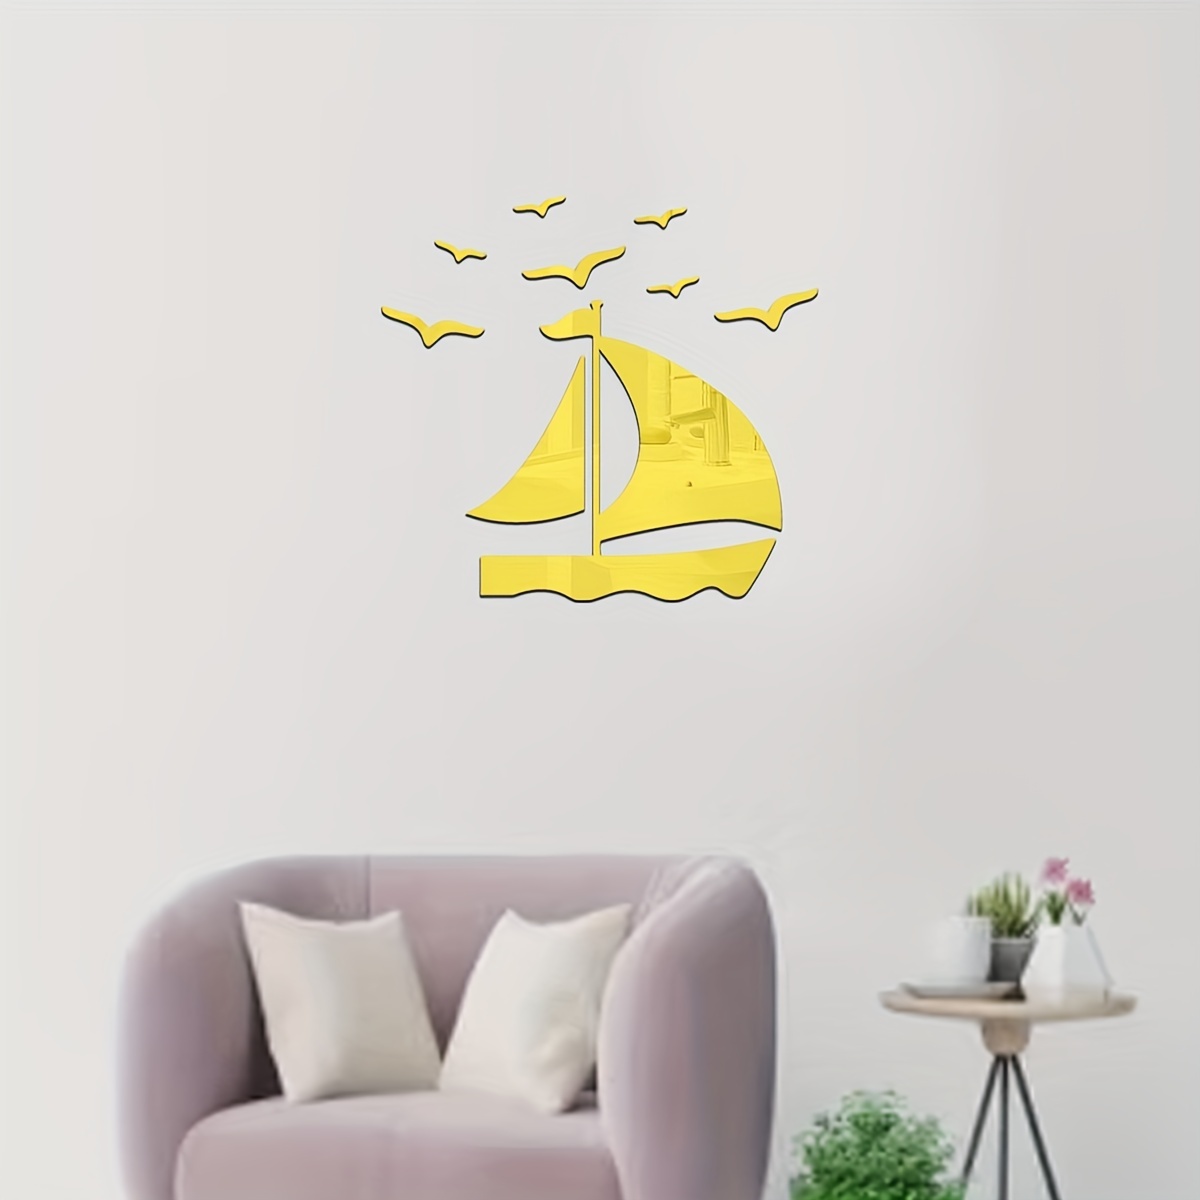 1pc 3d Acrylic Mirror Wall Sticker, Boat Seagull Wall Decals, Removable Wall  Decor Sticker For Living Room Bedroom Bathroom Office Home, Art Wall  Decoration, High-quality & Affordable